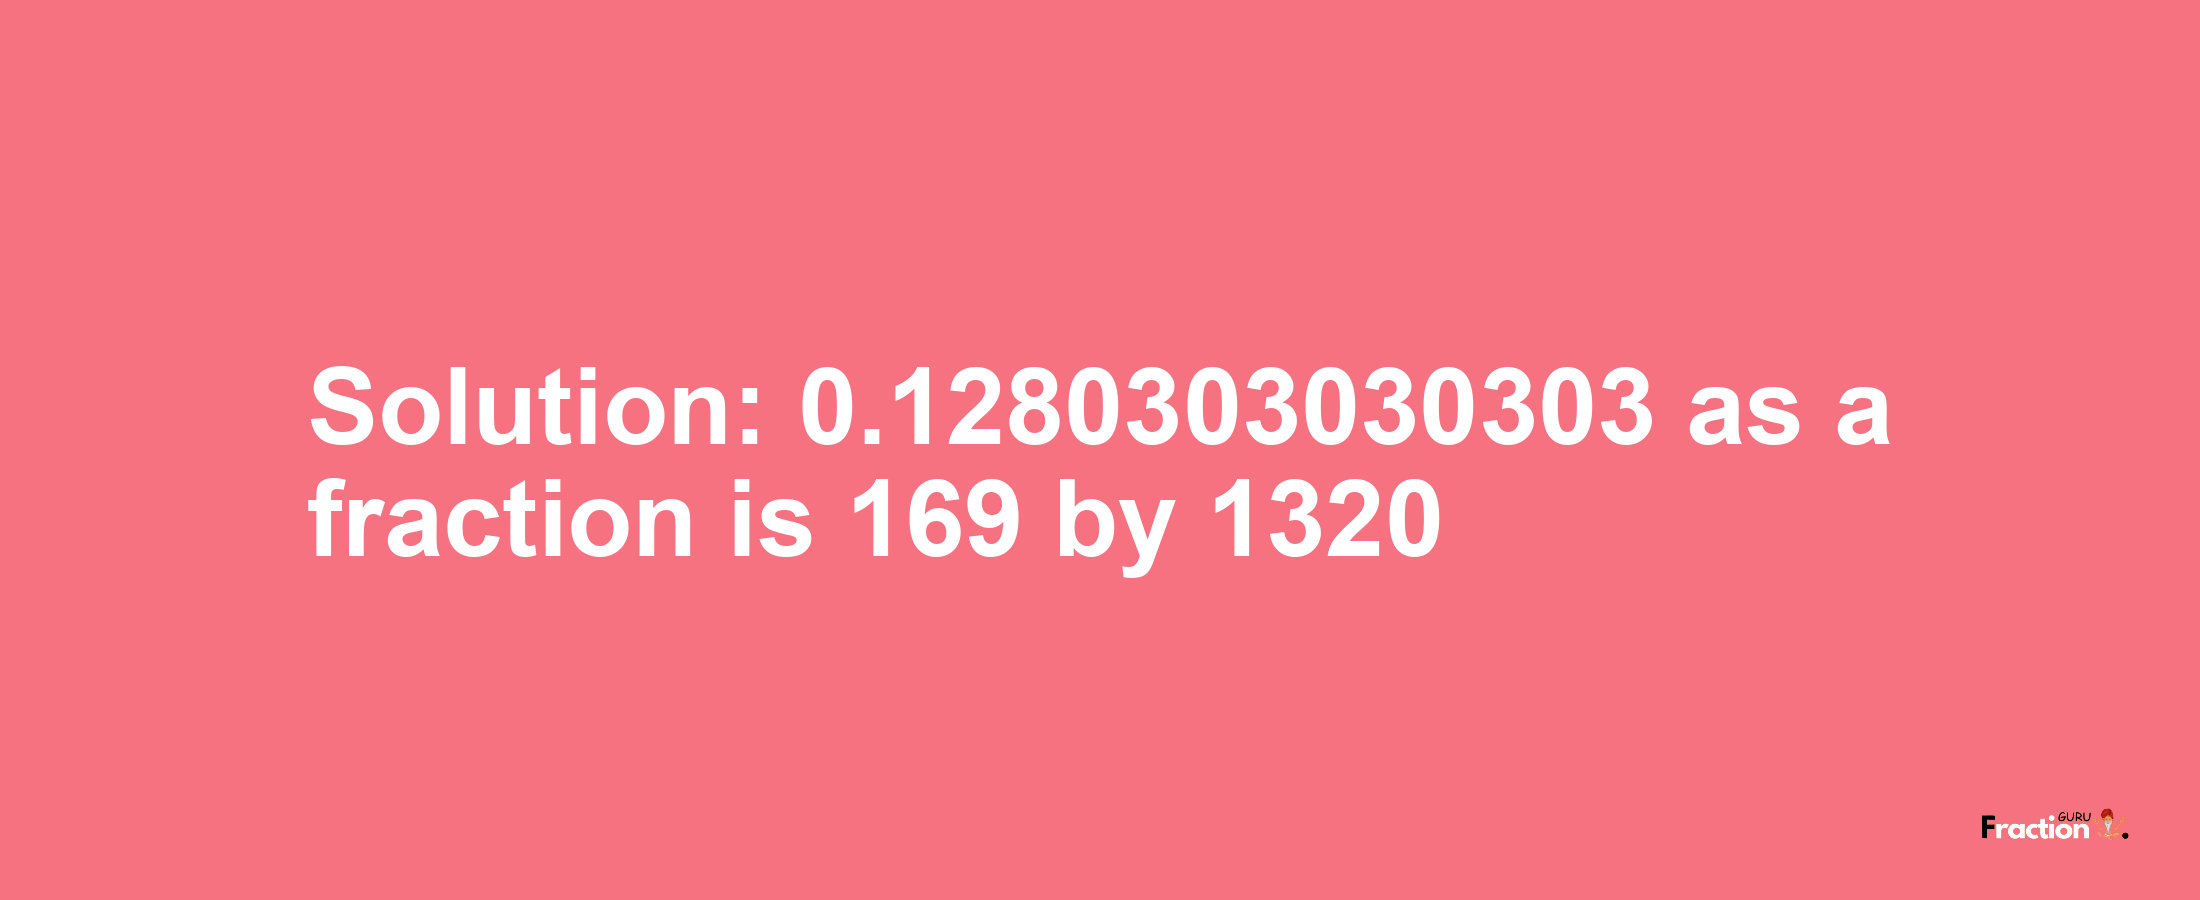 Solution:0.1280303030303 as a fraction is 169/1320